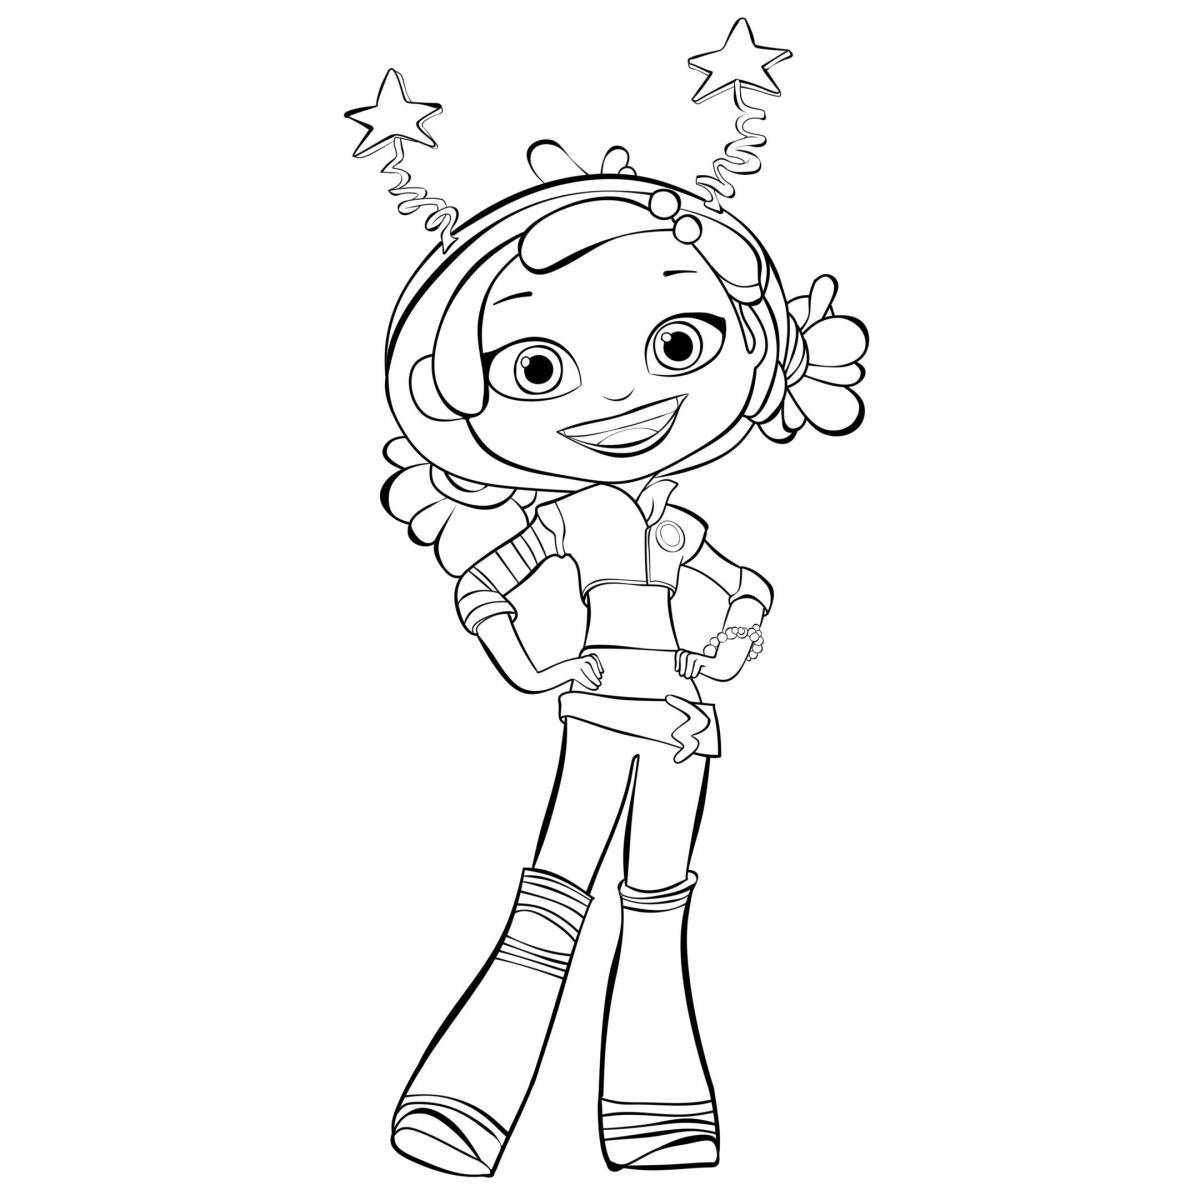 Glitter snow patrol coloring page